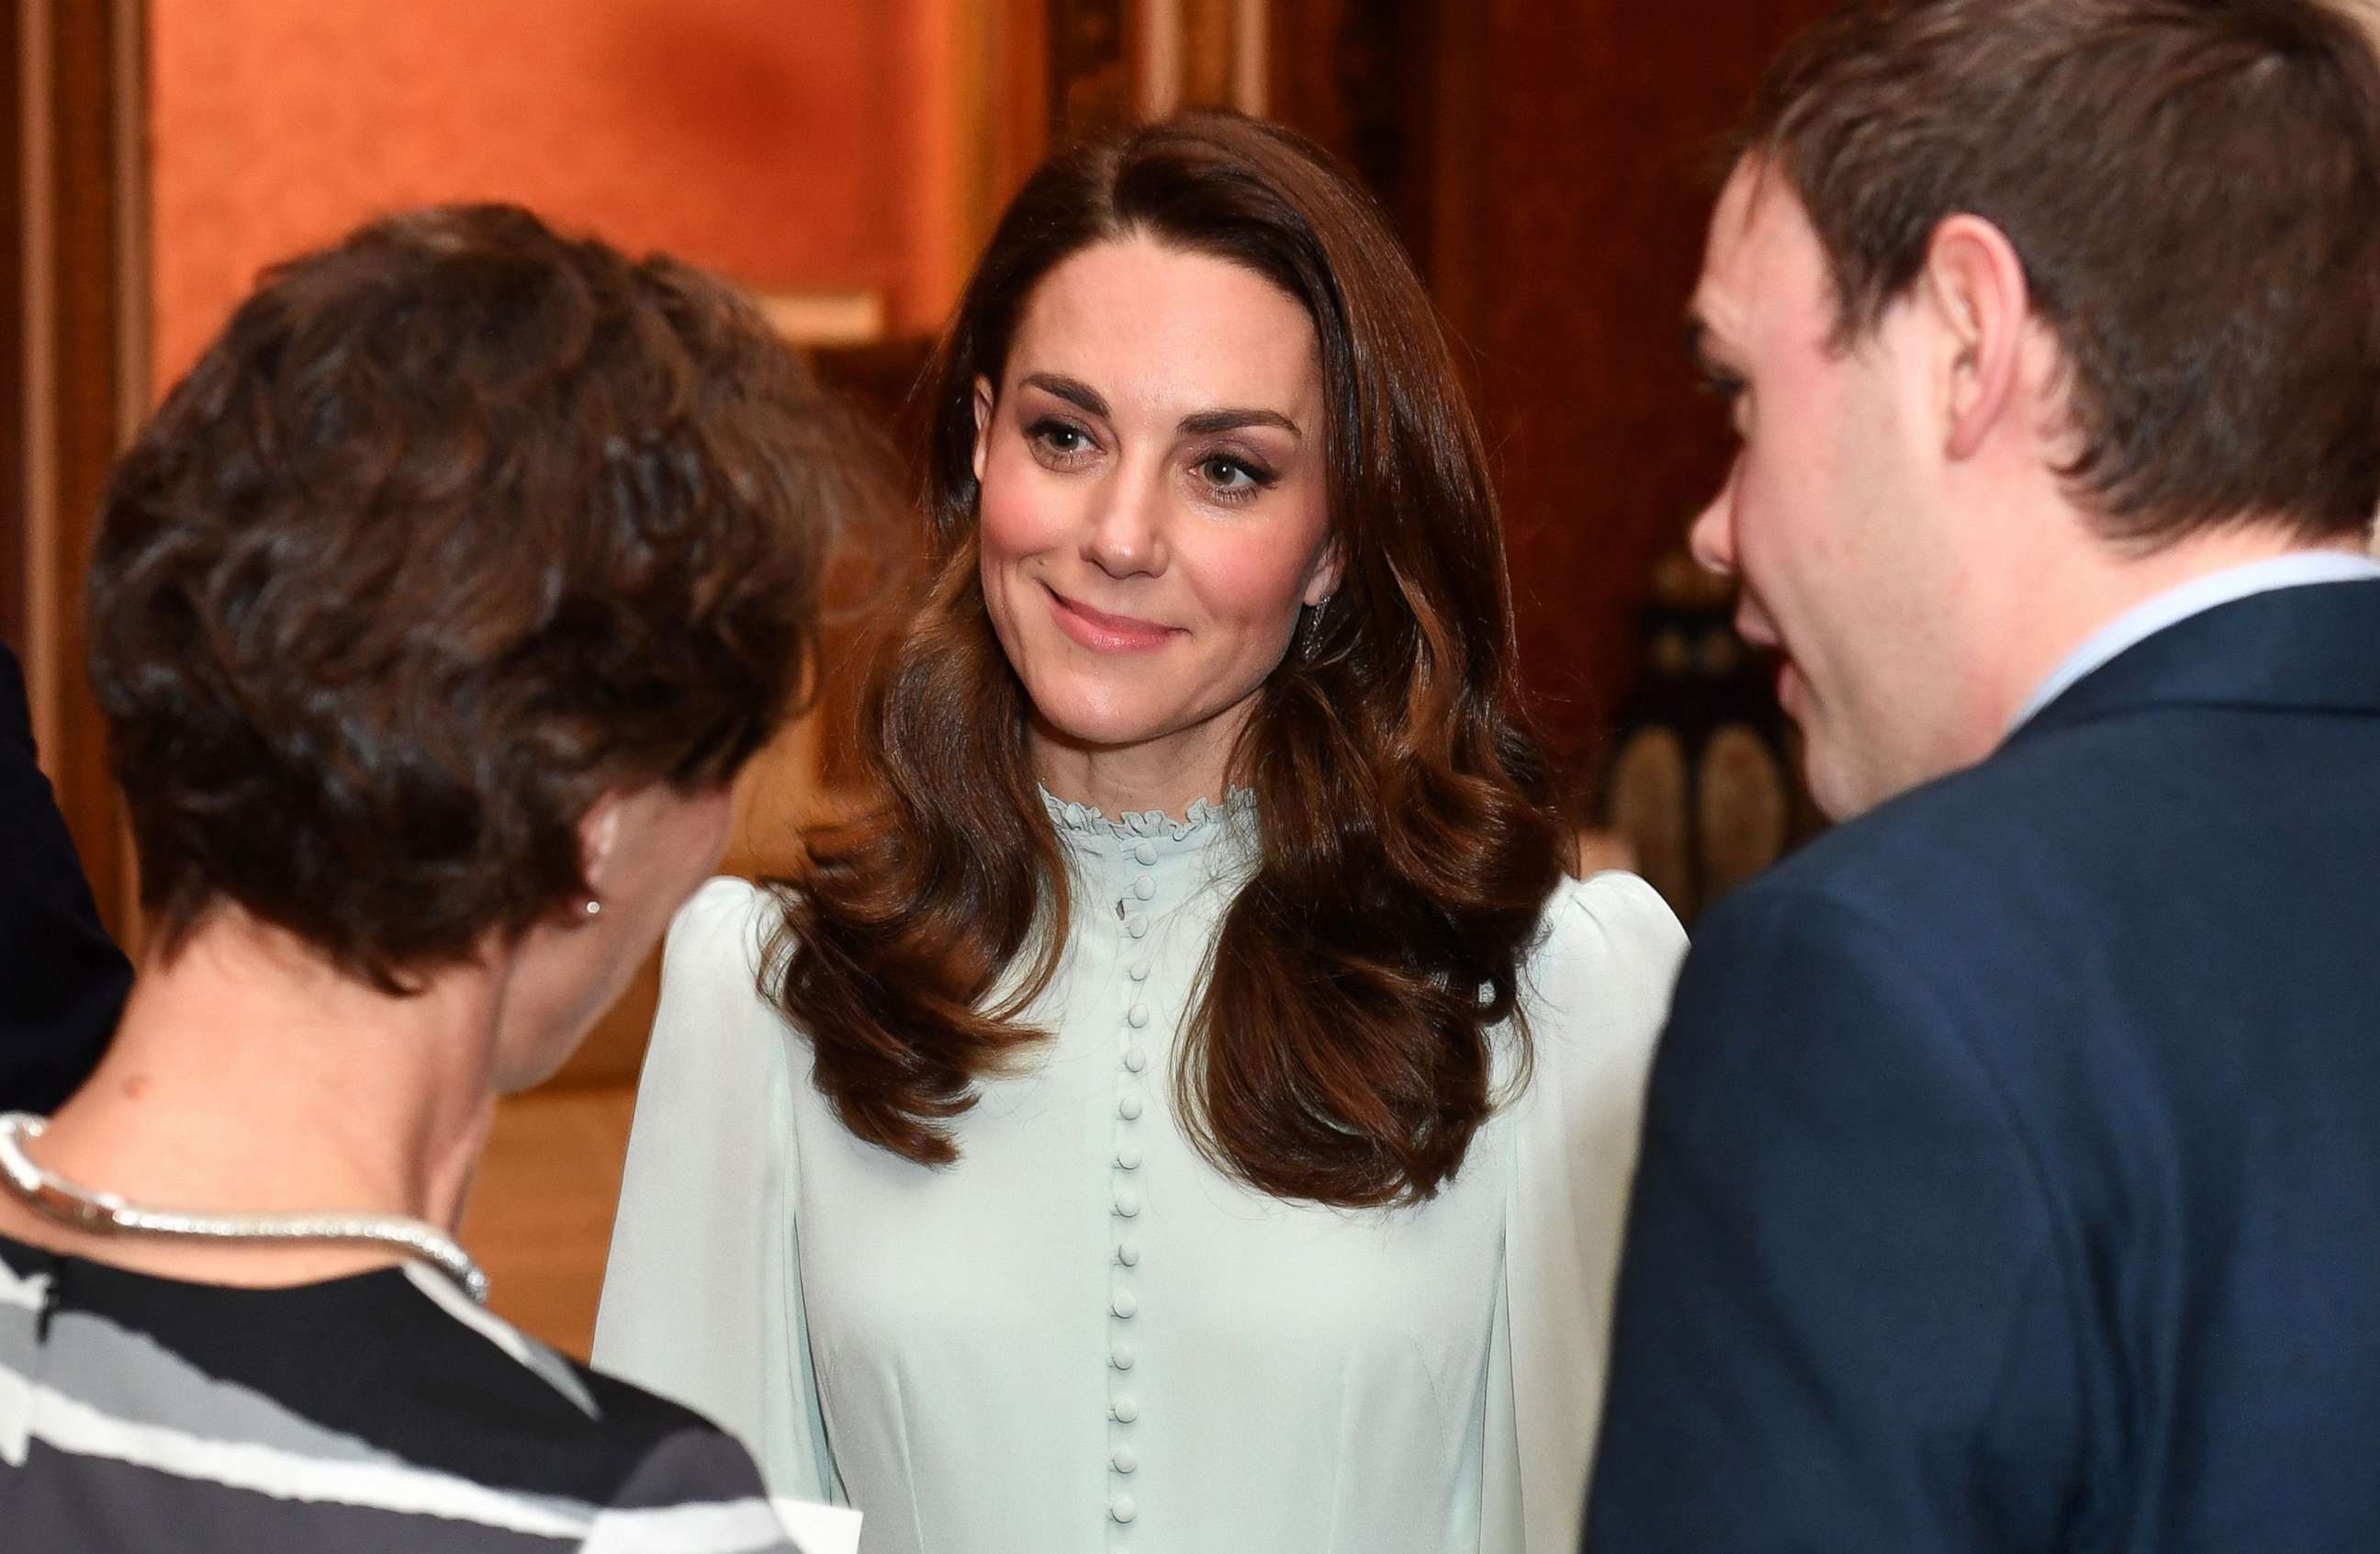 PHOTO: Catherine, Duchess of Cambridge, talks with guests as she attends a reception to mark the 50th Anniversary of the investiture of The Prince of Wales at Buckingham Palace in London, March 5, 2019.